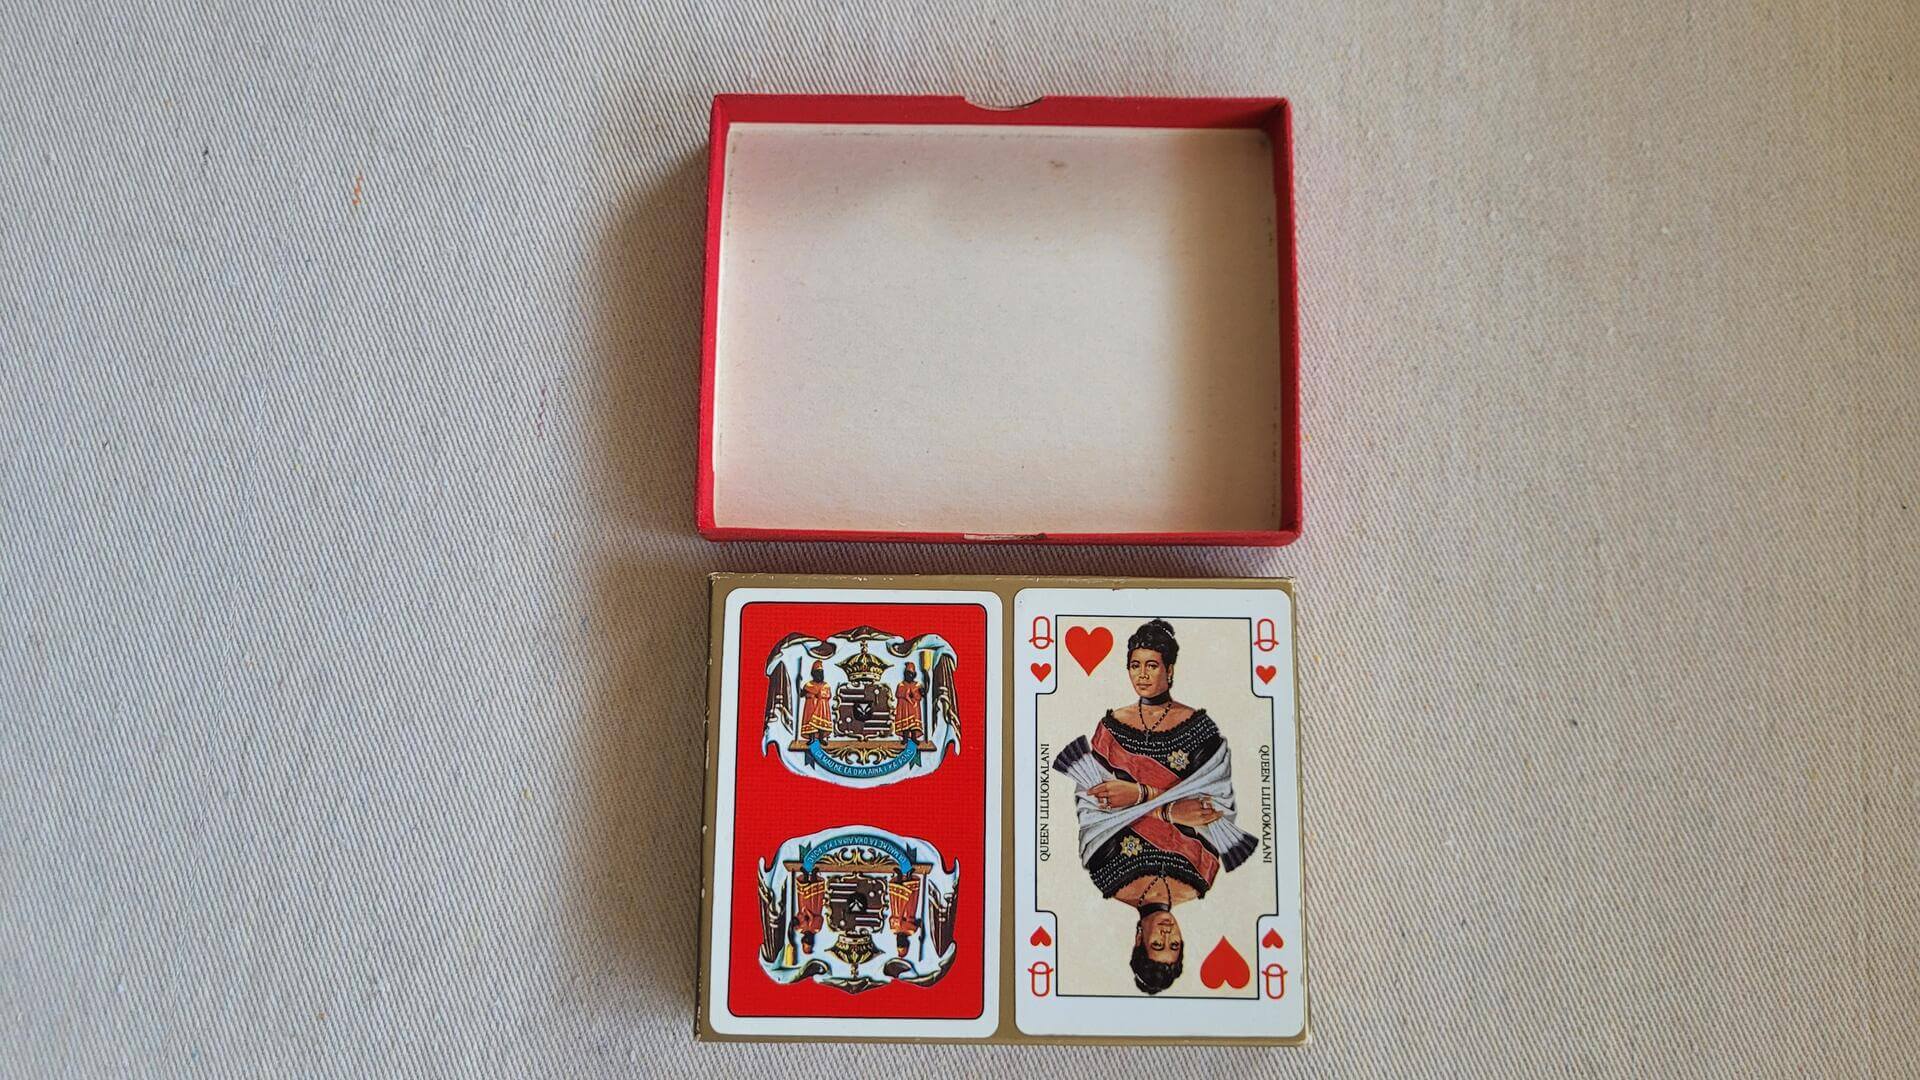 Rare vintage Royal Hawaiian playing cards double deck Hawaiian Monarchy Period, 1795-1893. Rare complete set retro 1970s made in USA collectible card games